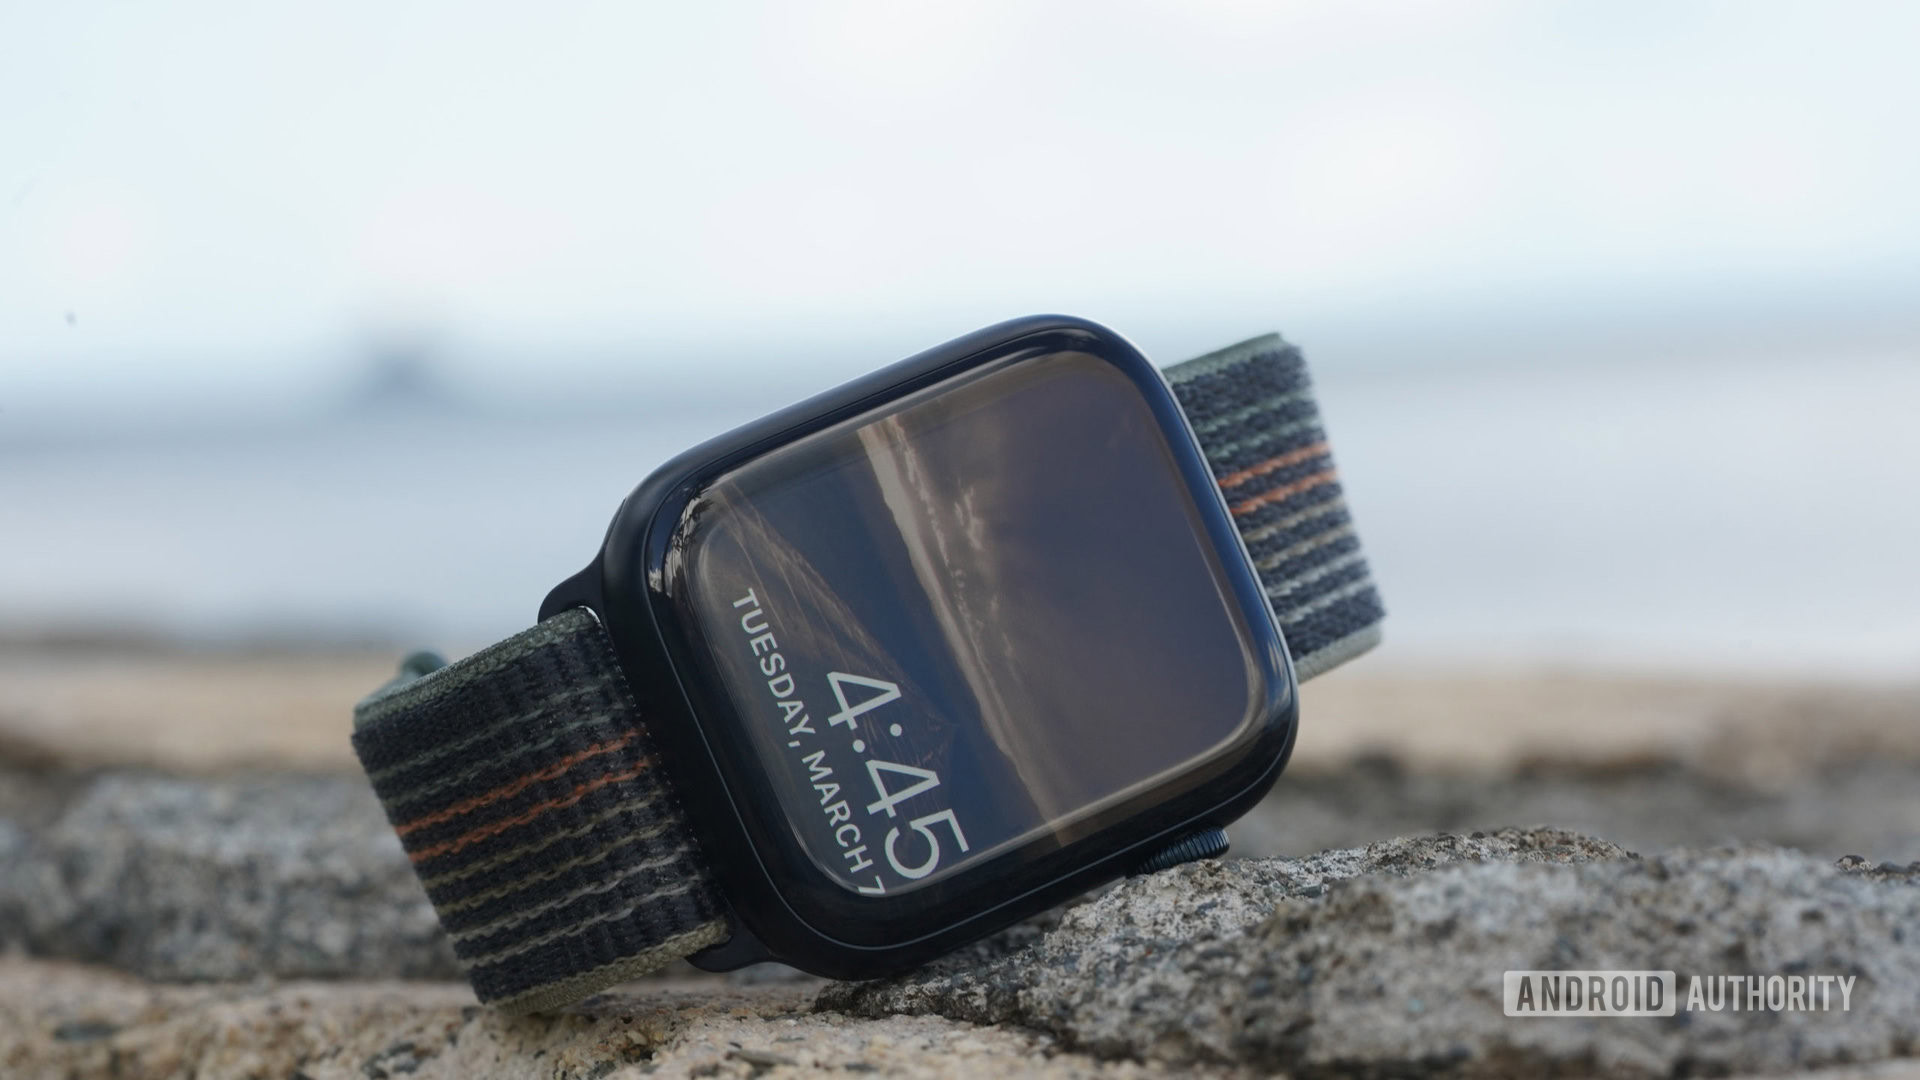 Are Solar Watches Good Or Bad? See 3 Pros & 2 Cons